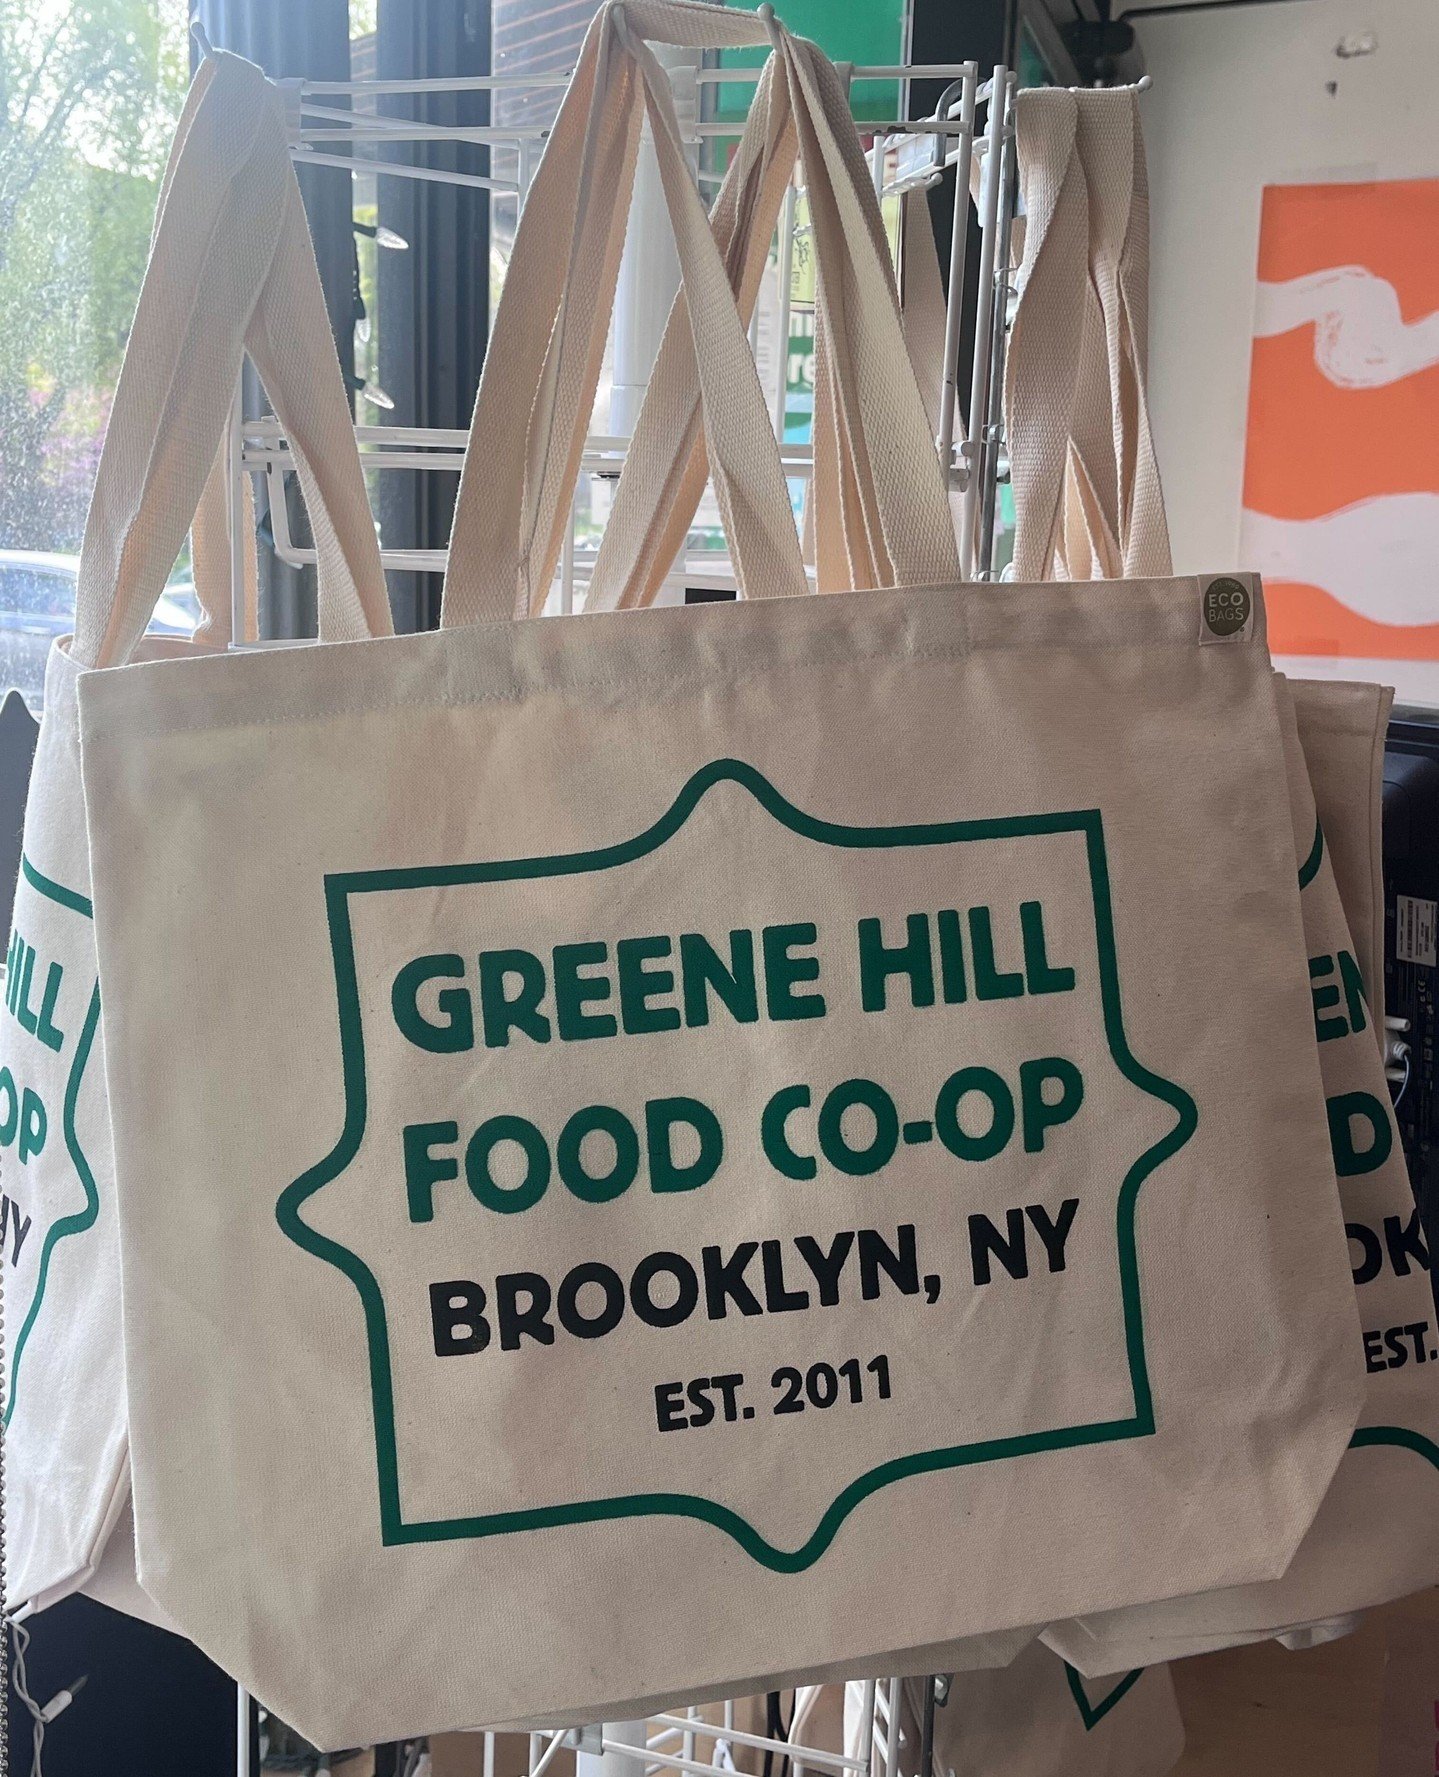 Forget your grocery bag? 😉 Come see us at the Co-op this week and pick up one of our brand new super-swanky tote bags! Member-owner designed and printed, these totes are a bit sturdier than the last set and have a fresh new design. $15, come and get